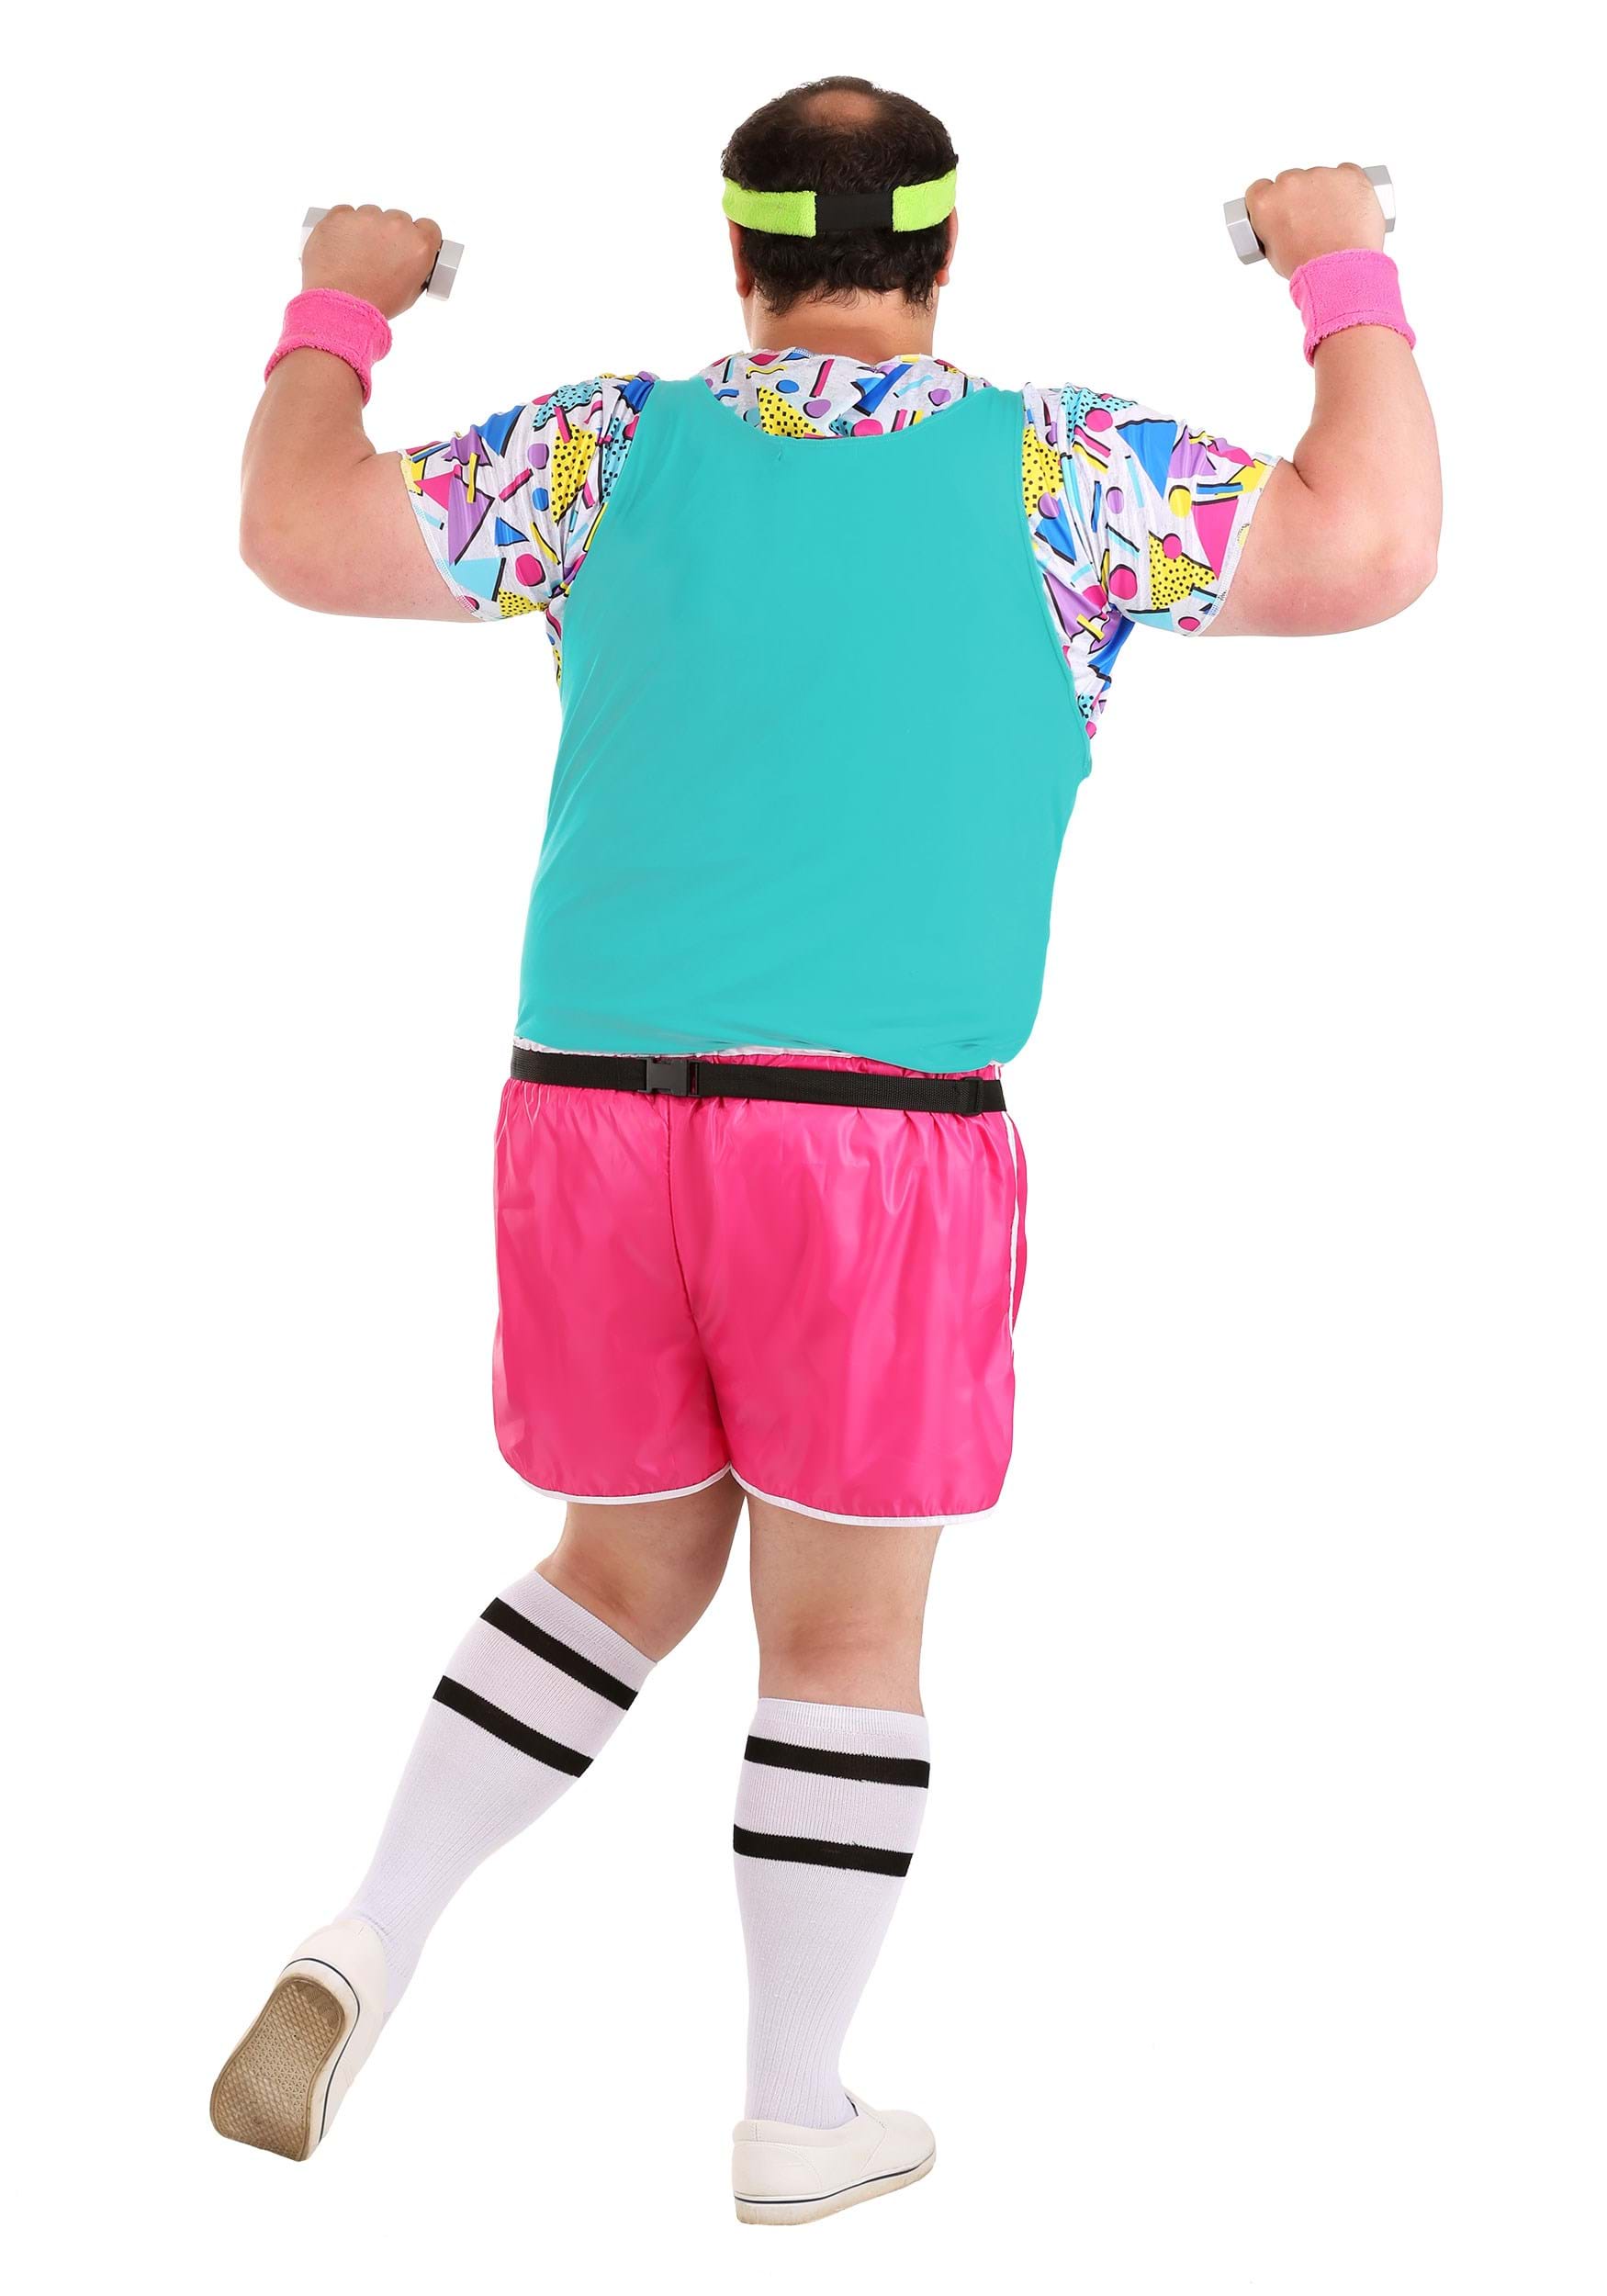 https://images.fun.co.uk/products/64380/2-1-163162/mens-plus-size-work-it-out-80s-costume-.jpg